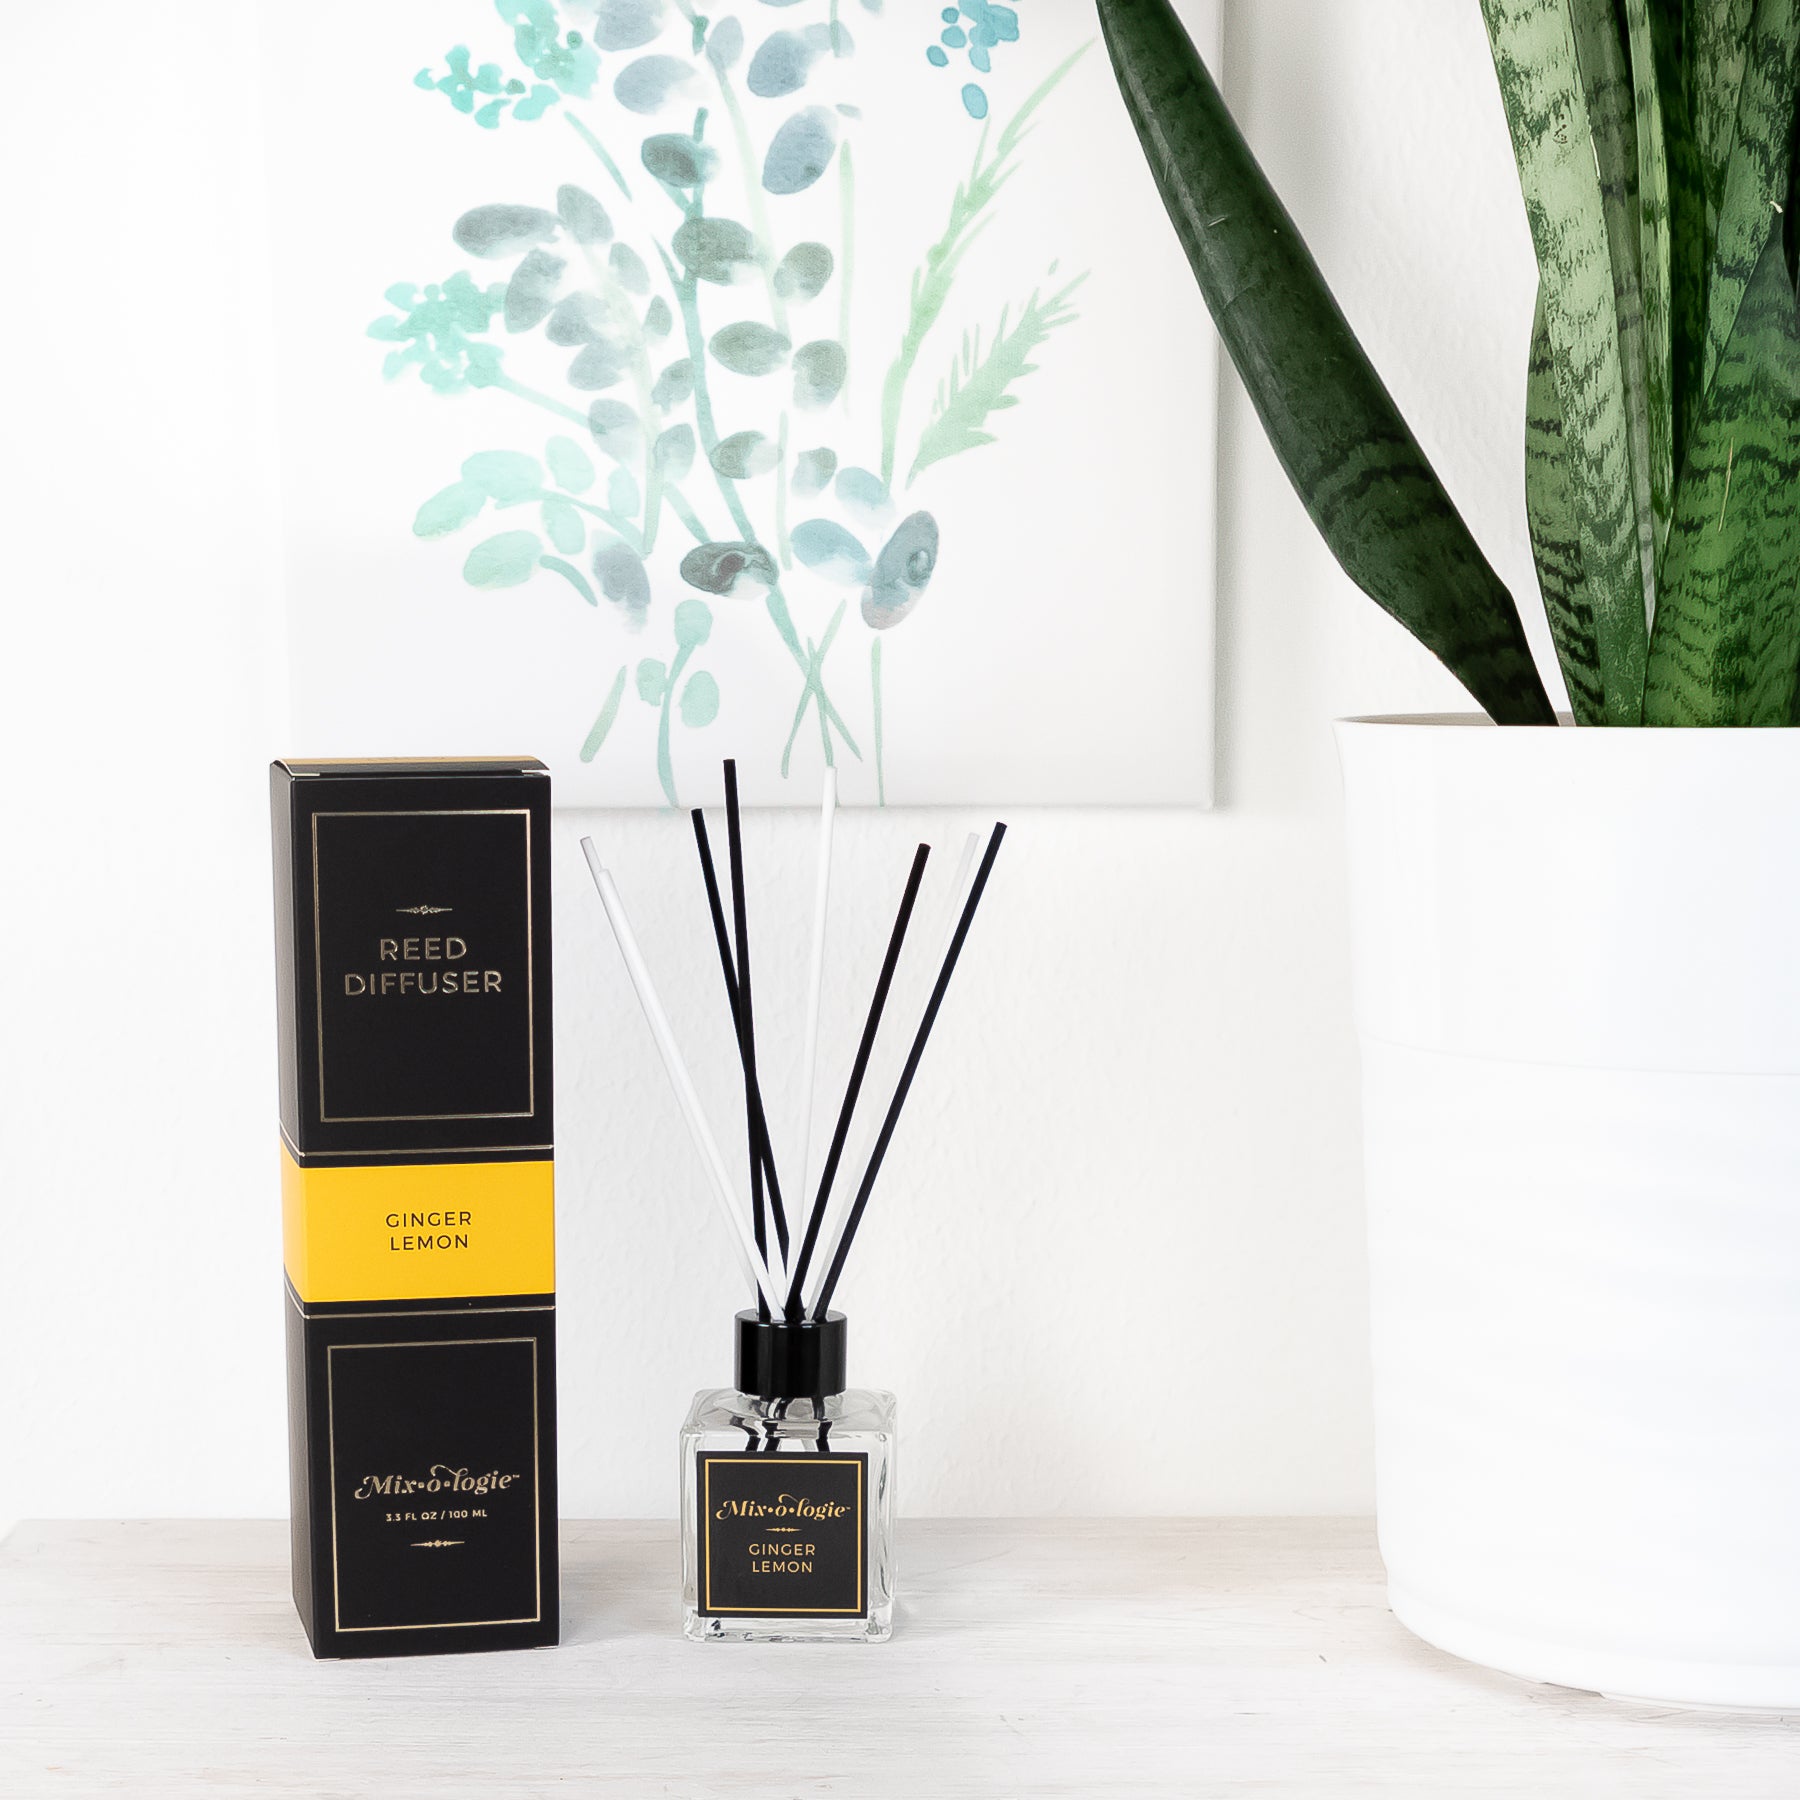 Ginger Lemon Reed Diffuser is a clear square glass container with black label that says Mixologie – Ginger Lemon. Has a black top and 4 white & 4 black reed sticks coming out of top, is 3.3 fl oz or 100 mL of clear scented liquid. Black rectangle package box with mustard label. Box and diffuser are pictured with white furniture and white potted plant and green artwork.